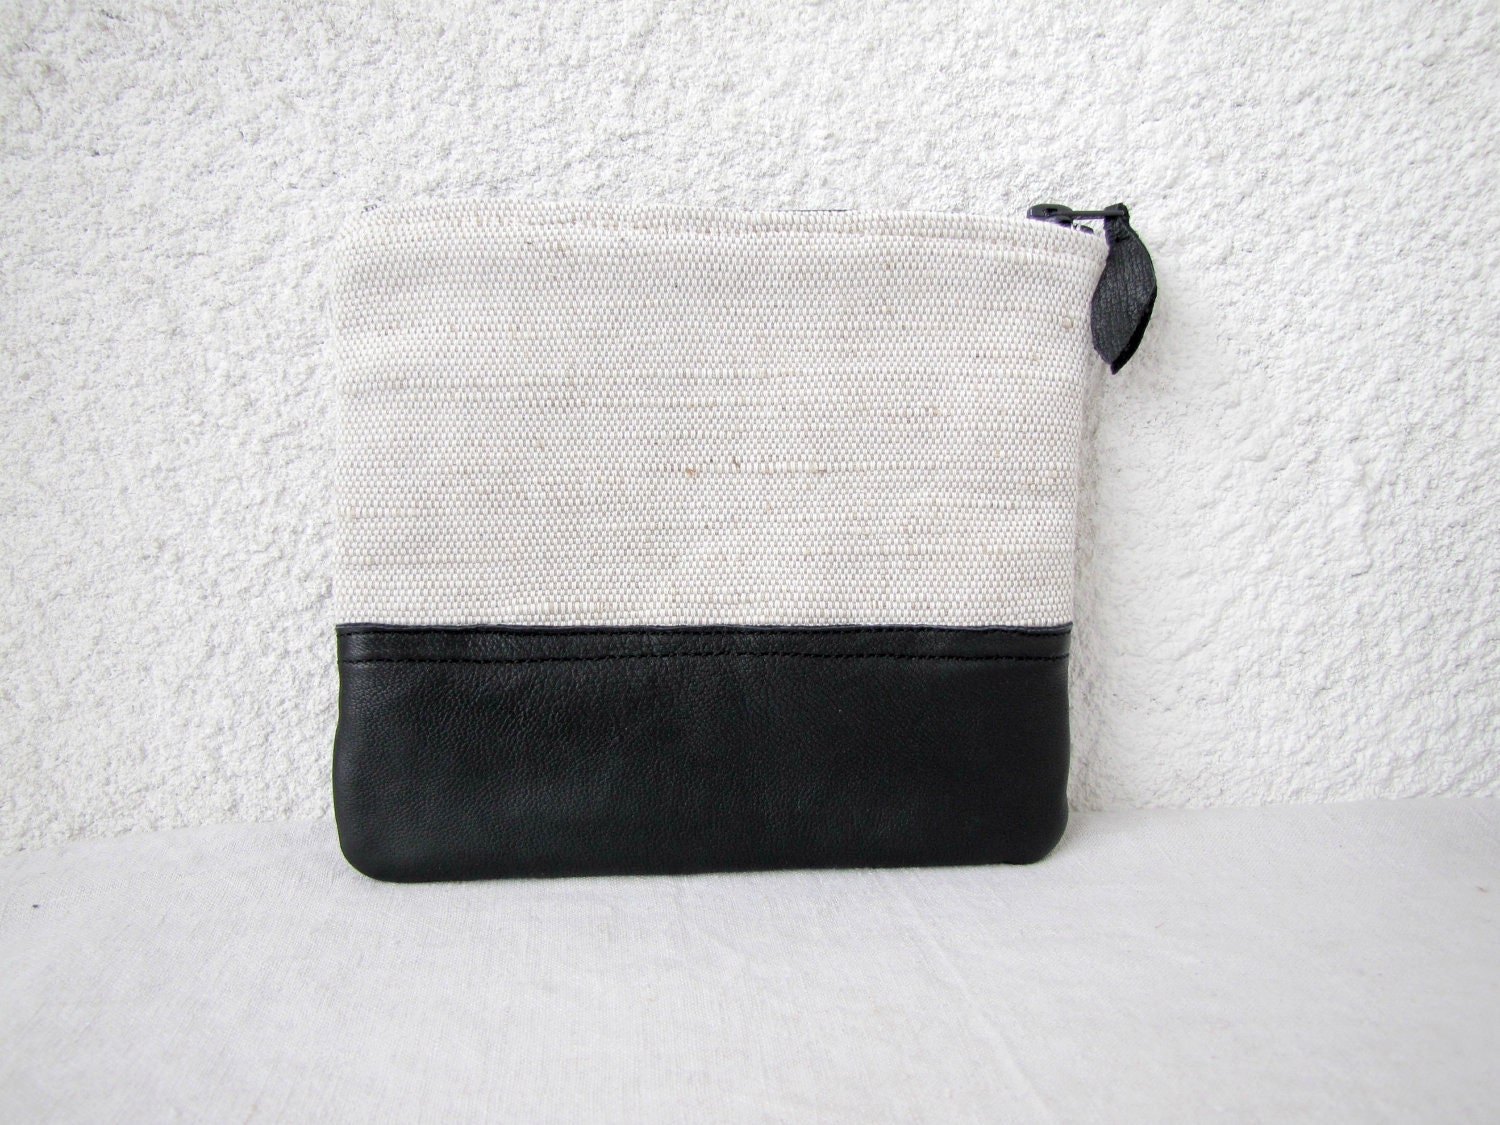 Canvas zipper pouch clutch purse cosmetic bag, upcycled leather bottom